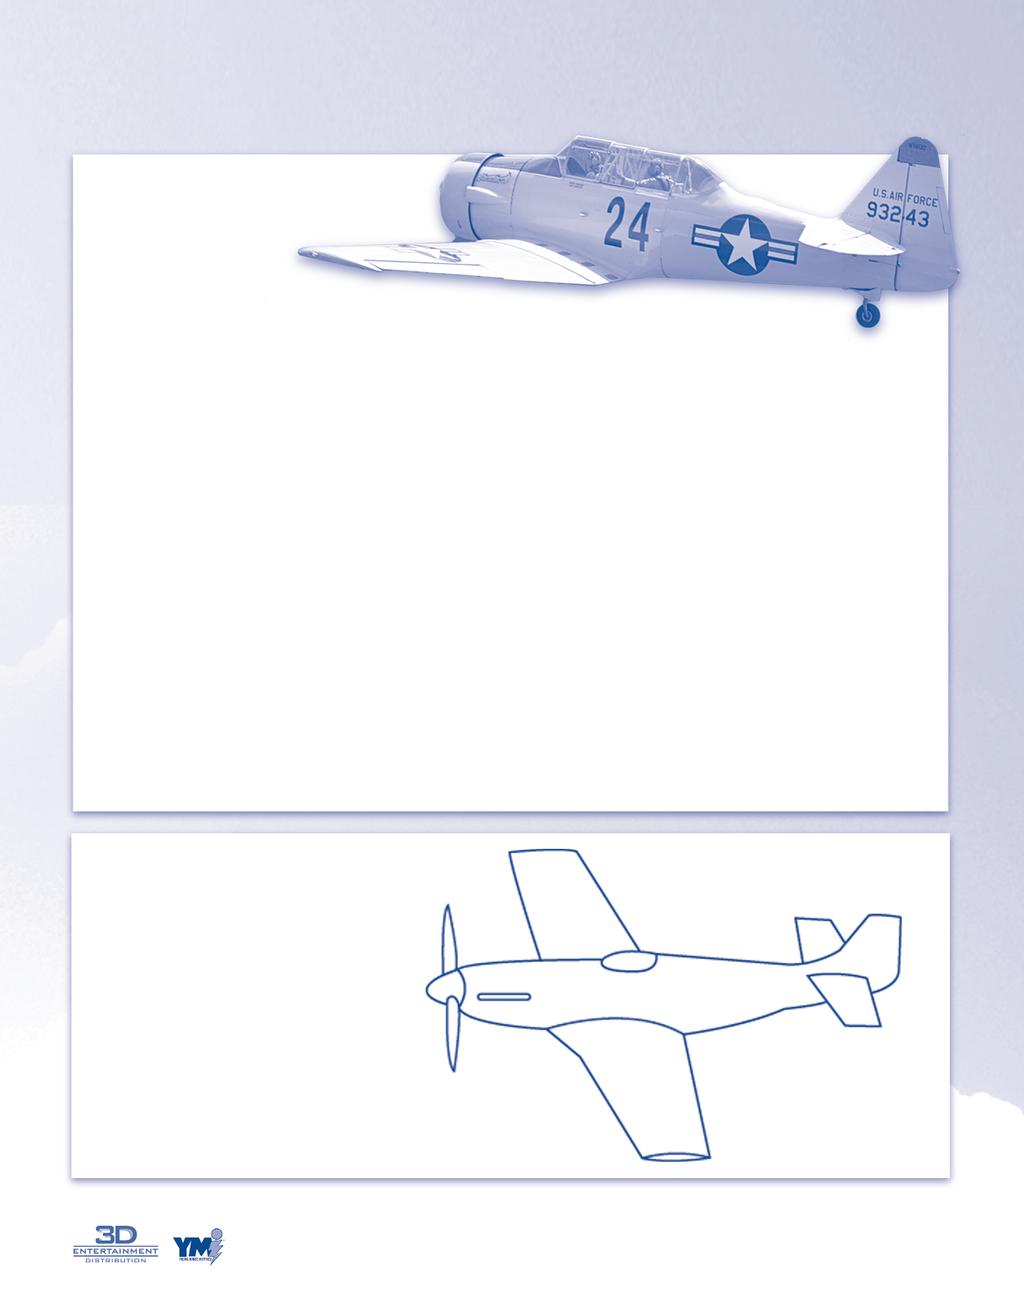 ACTIVITY 3 REPRODUCIBLE MASTER GRADES 2-5 (AGES 7-10) THE HUMAN COMPONENT In Air Racers, you meet Steve Hinton, who inherited his passion for World War II military aircraft from his father.